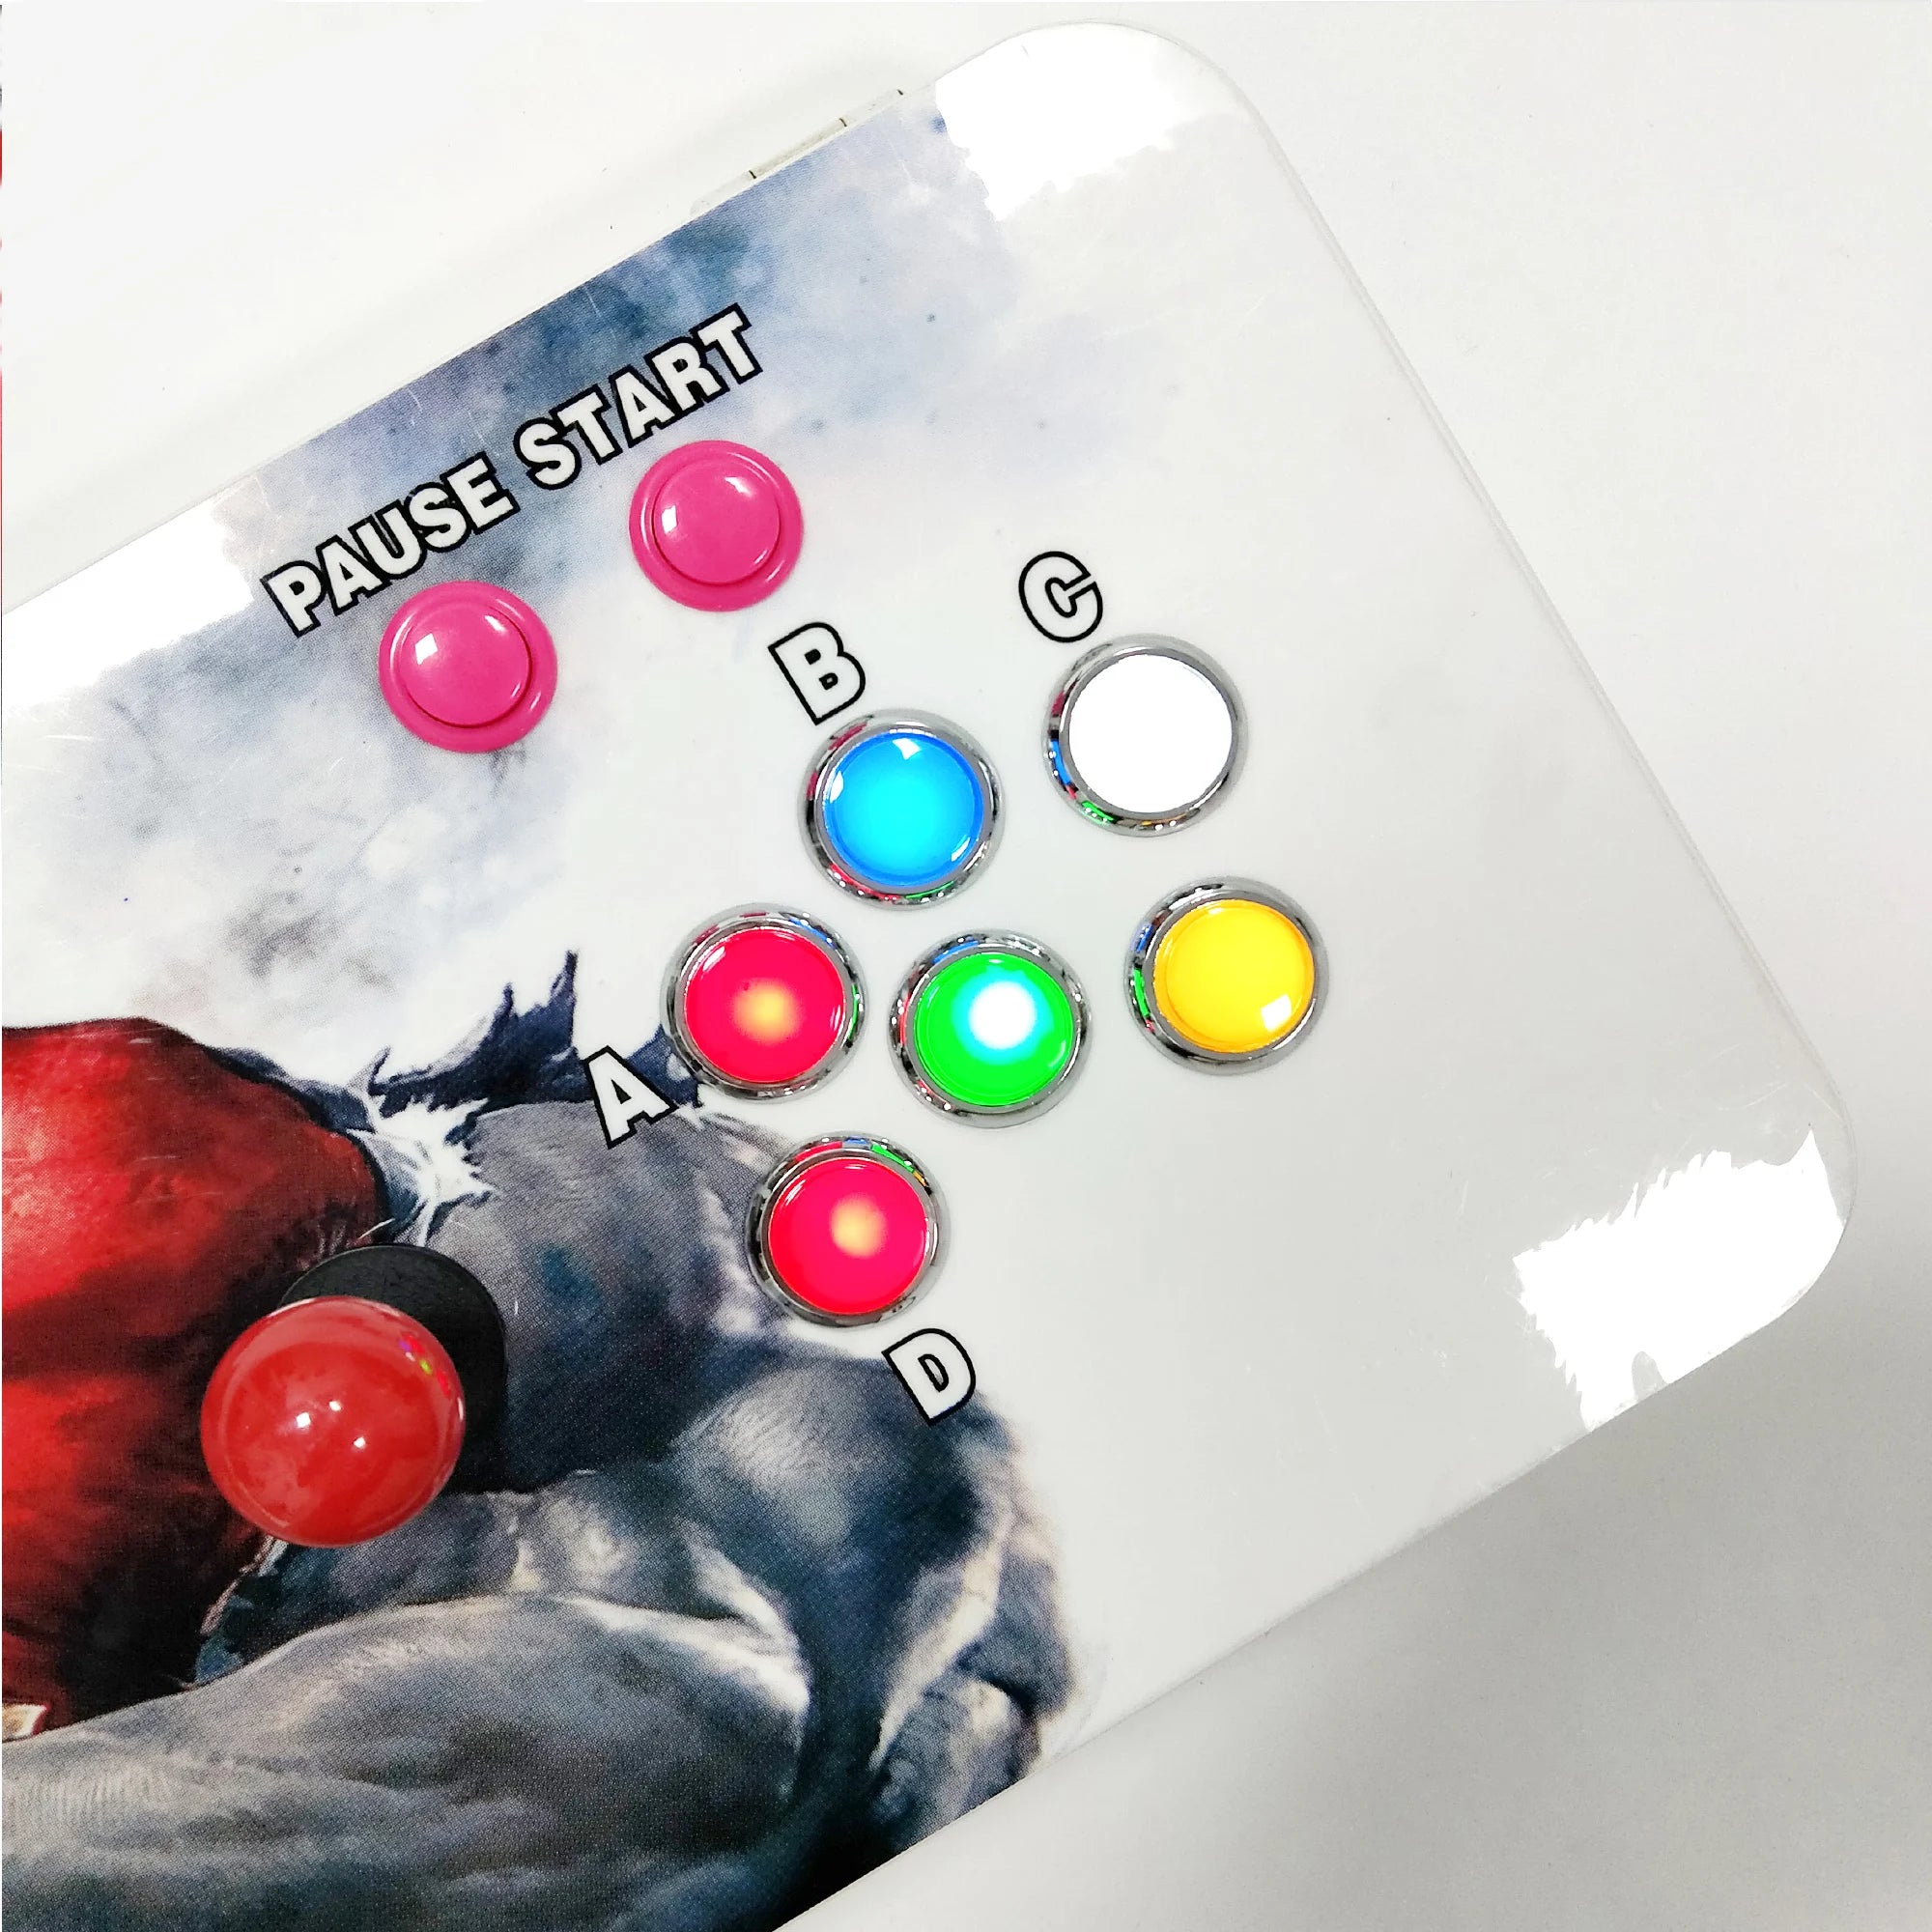 Cloud Discoveries 2 Player 4710 in 1 Pandora Saga Box Kit with SANWA Joystick, Chrome LED Push Button DIY Arcade Machine Home Cabinet. Perfect for family entertainment and arcade Cabinet DIY projects.